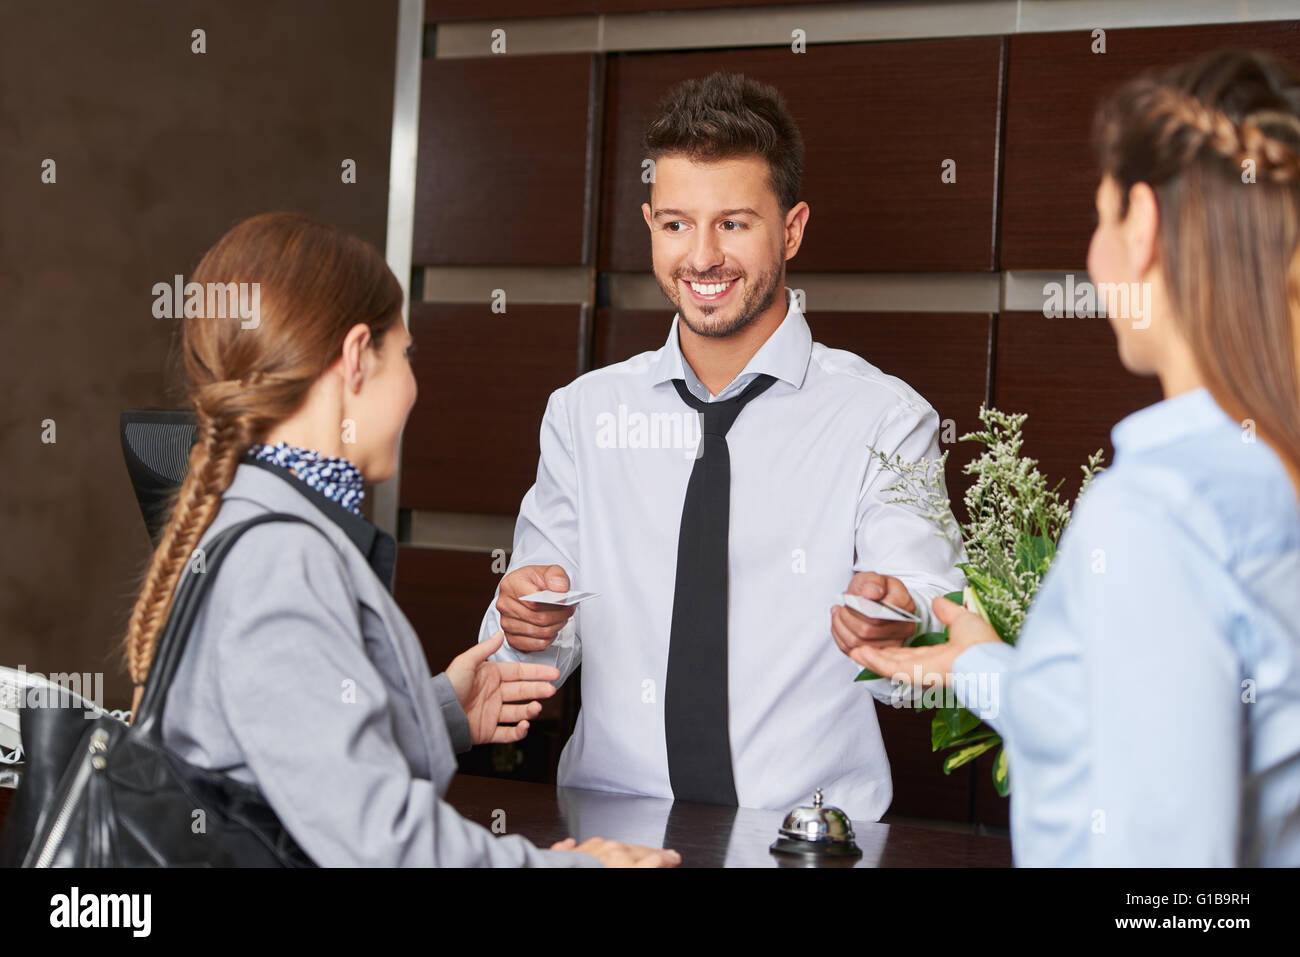 Hotel receptionist giving out key cards to guests Stock Photo